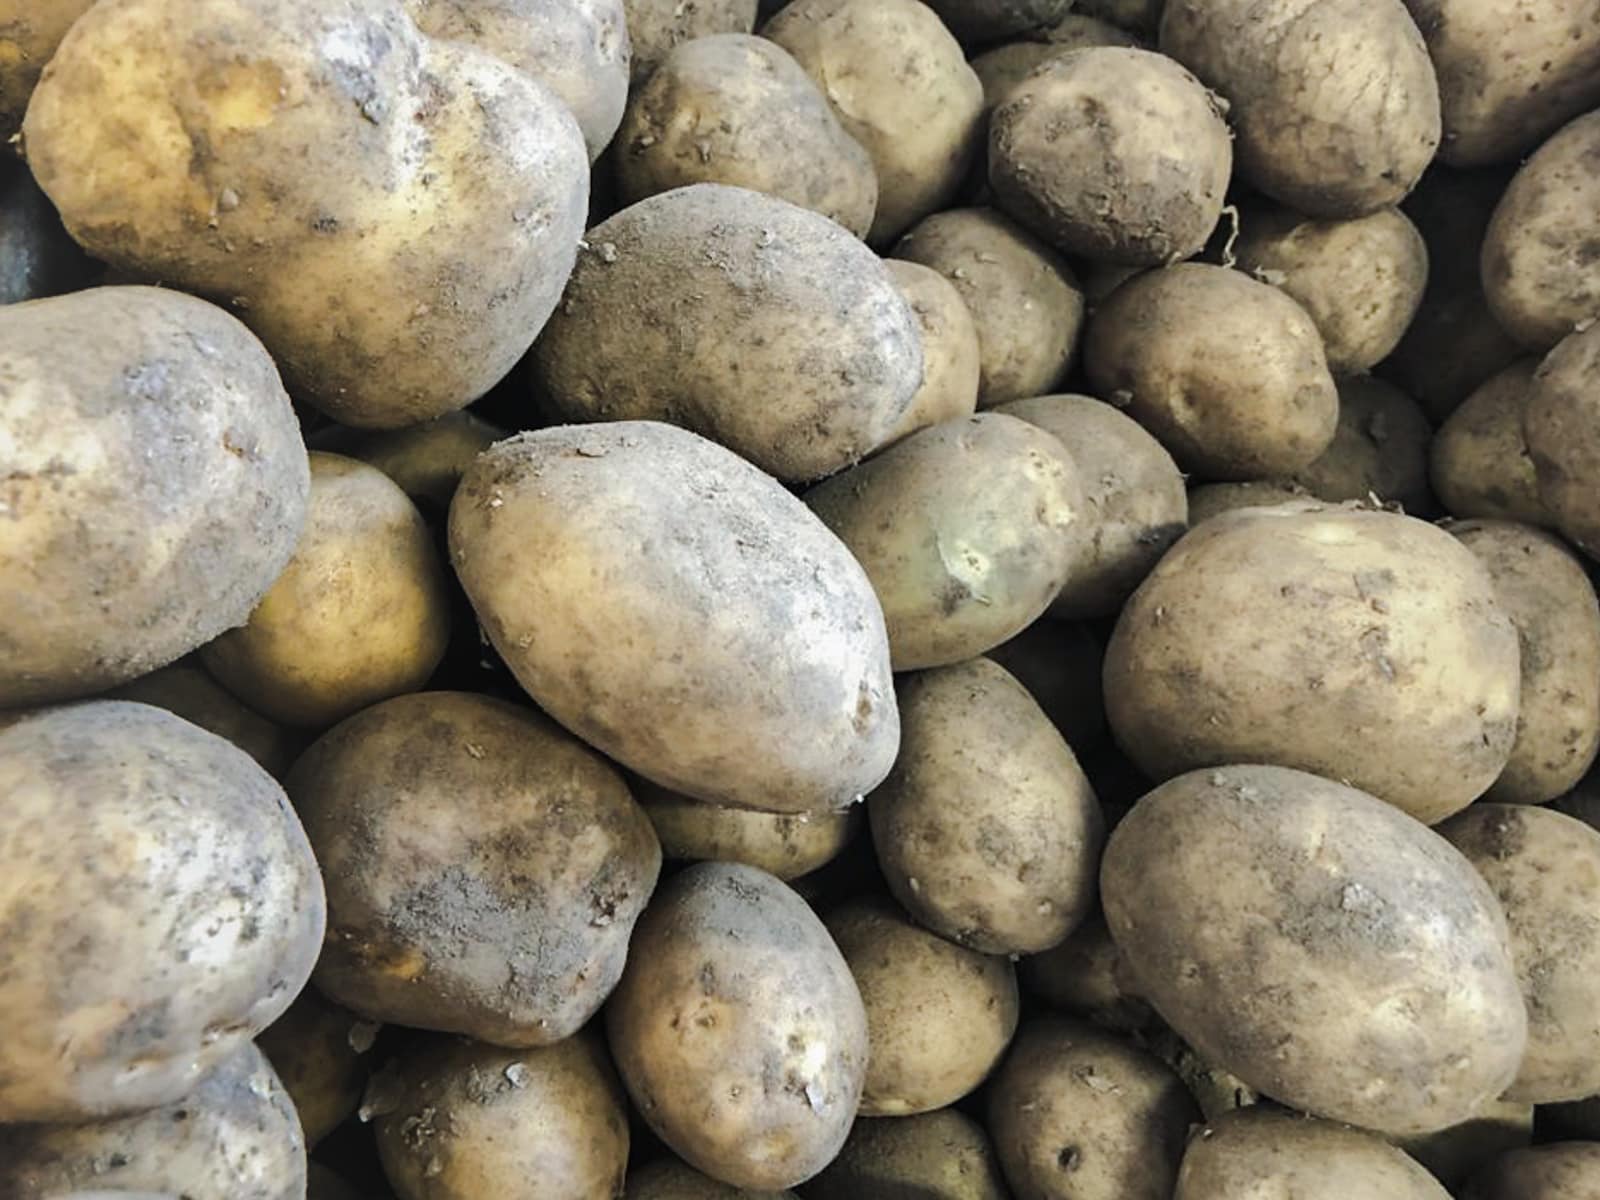 A bunch of freshly picked potatoes, still with soil on the skins close up.